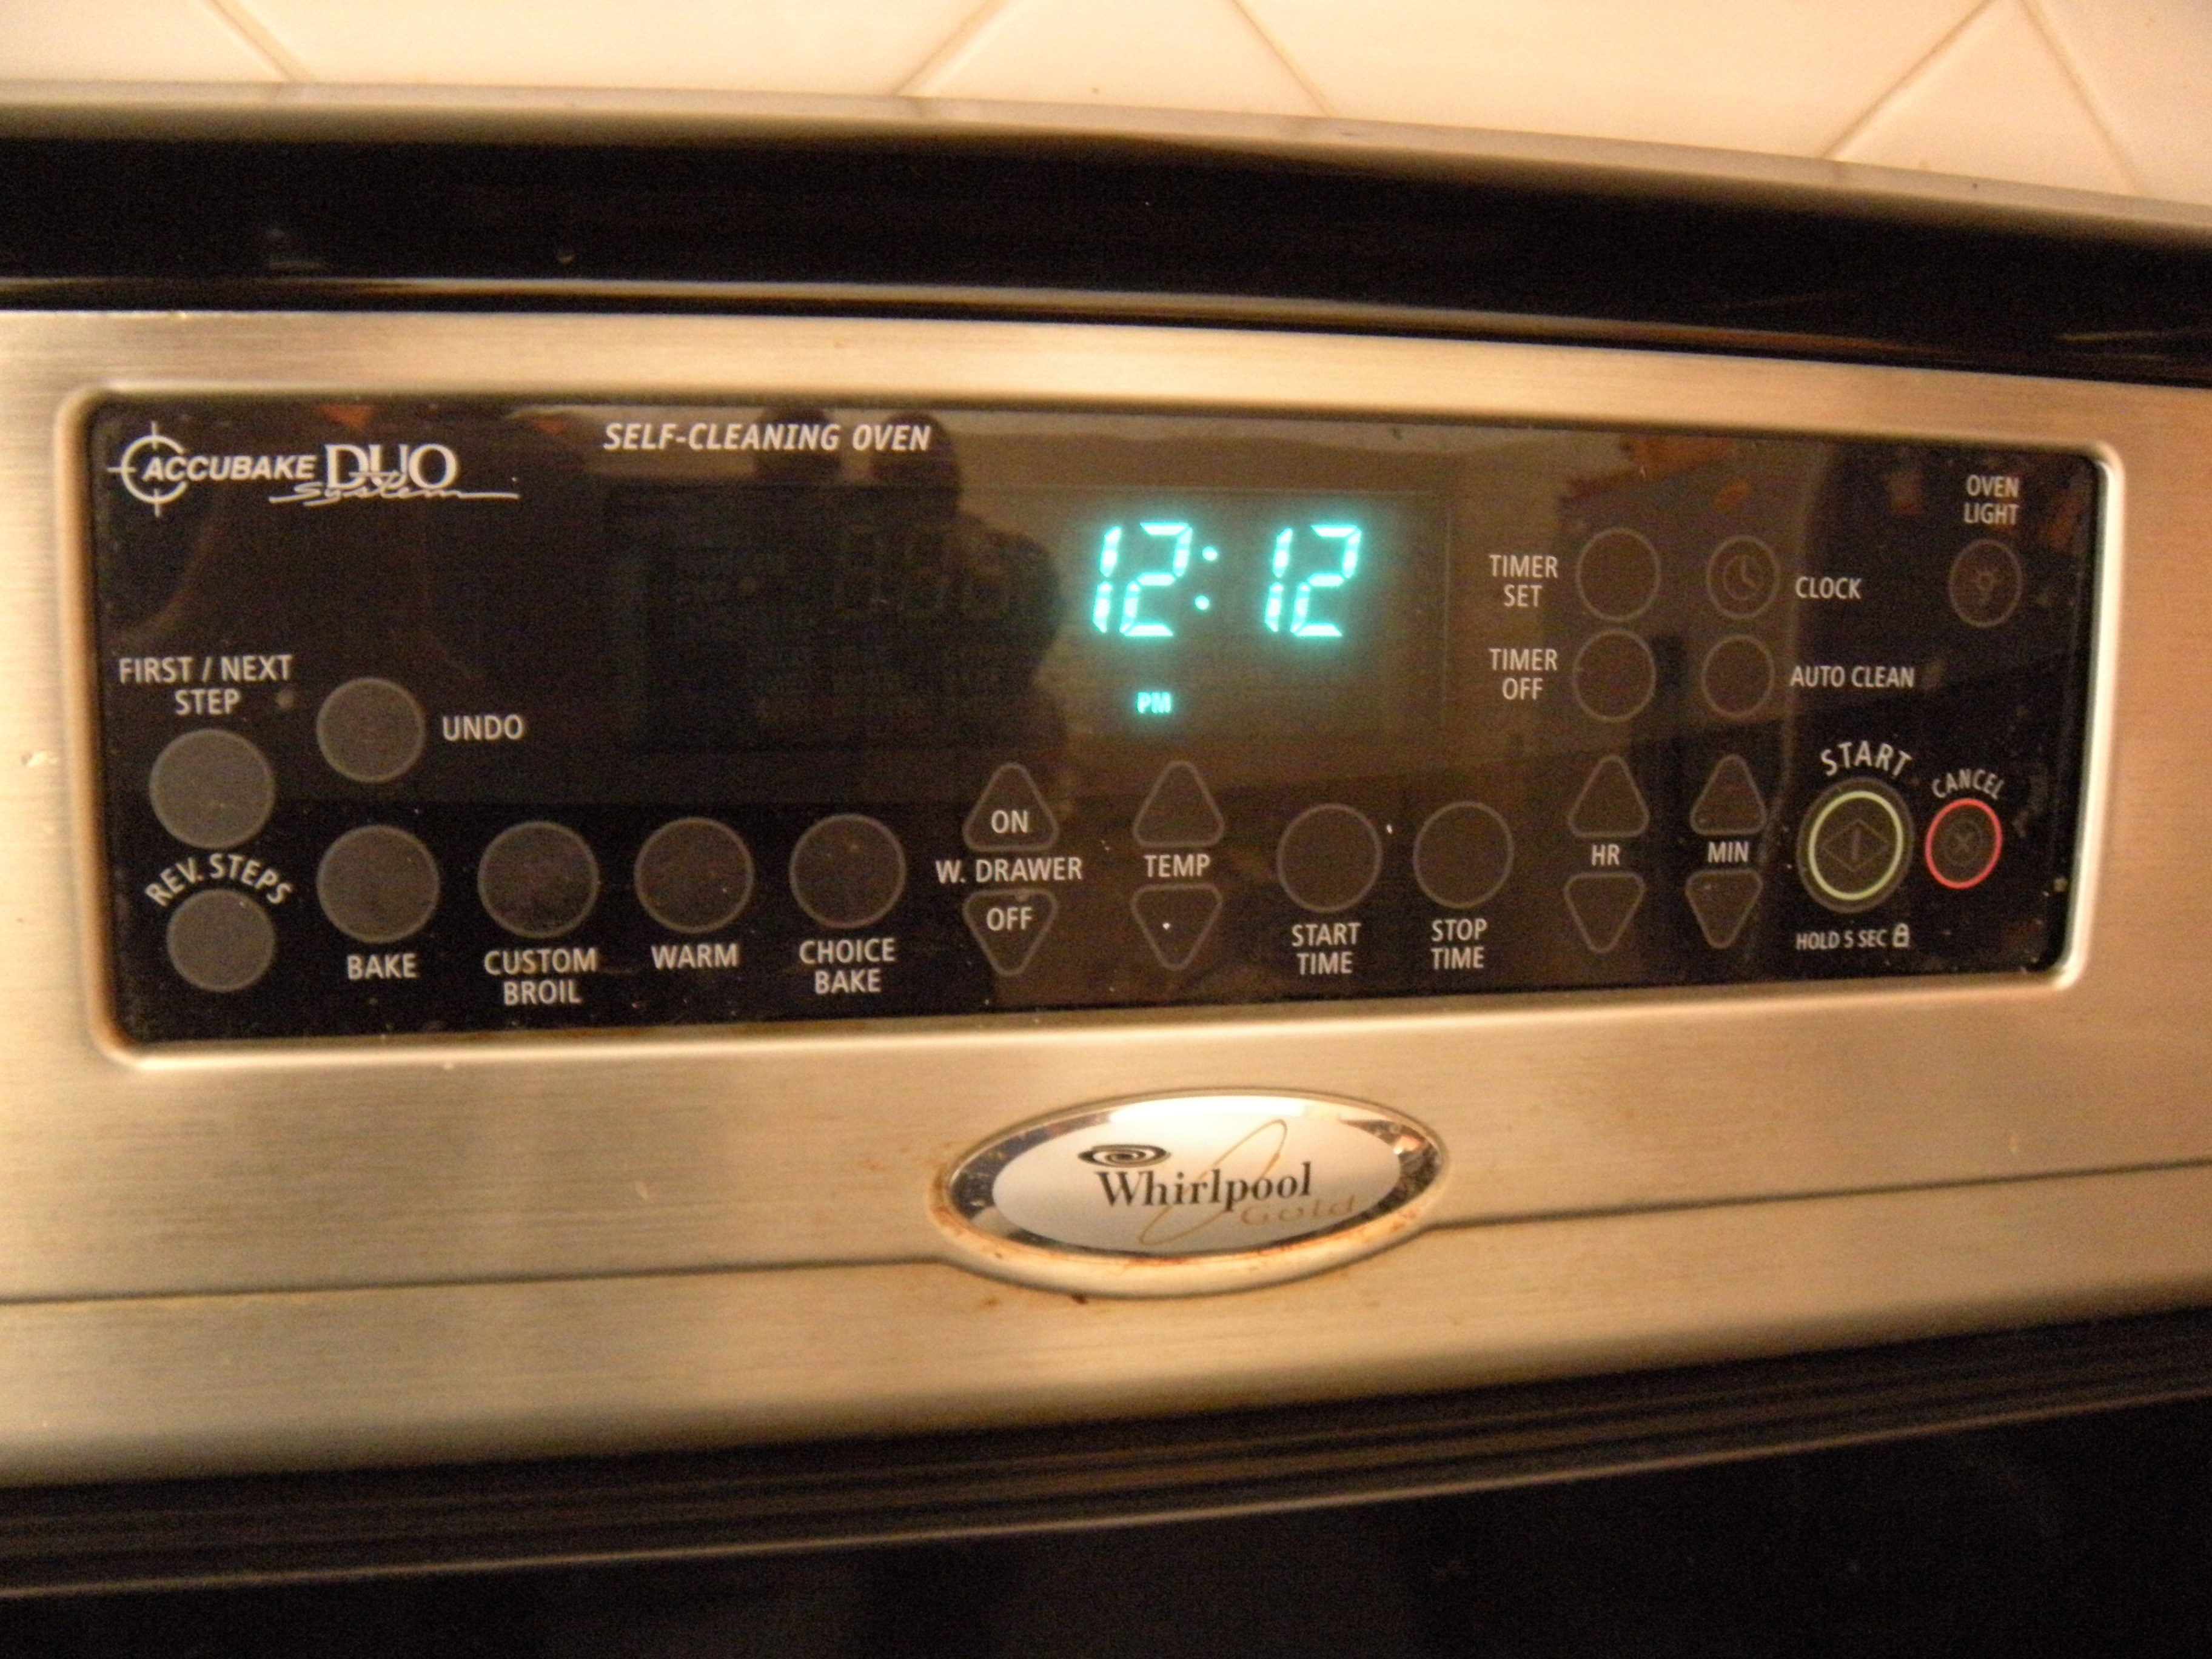 What do you do when your Whirlpool oven takes too long to pre heat?